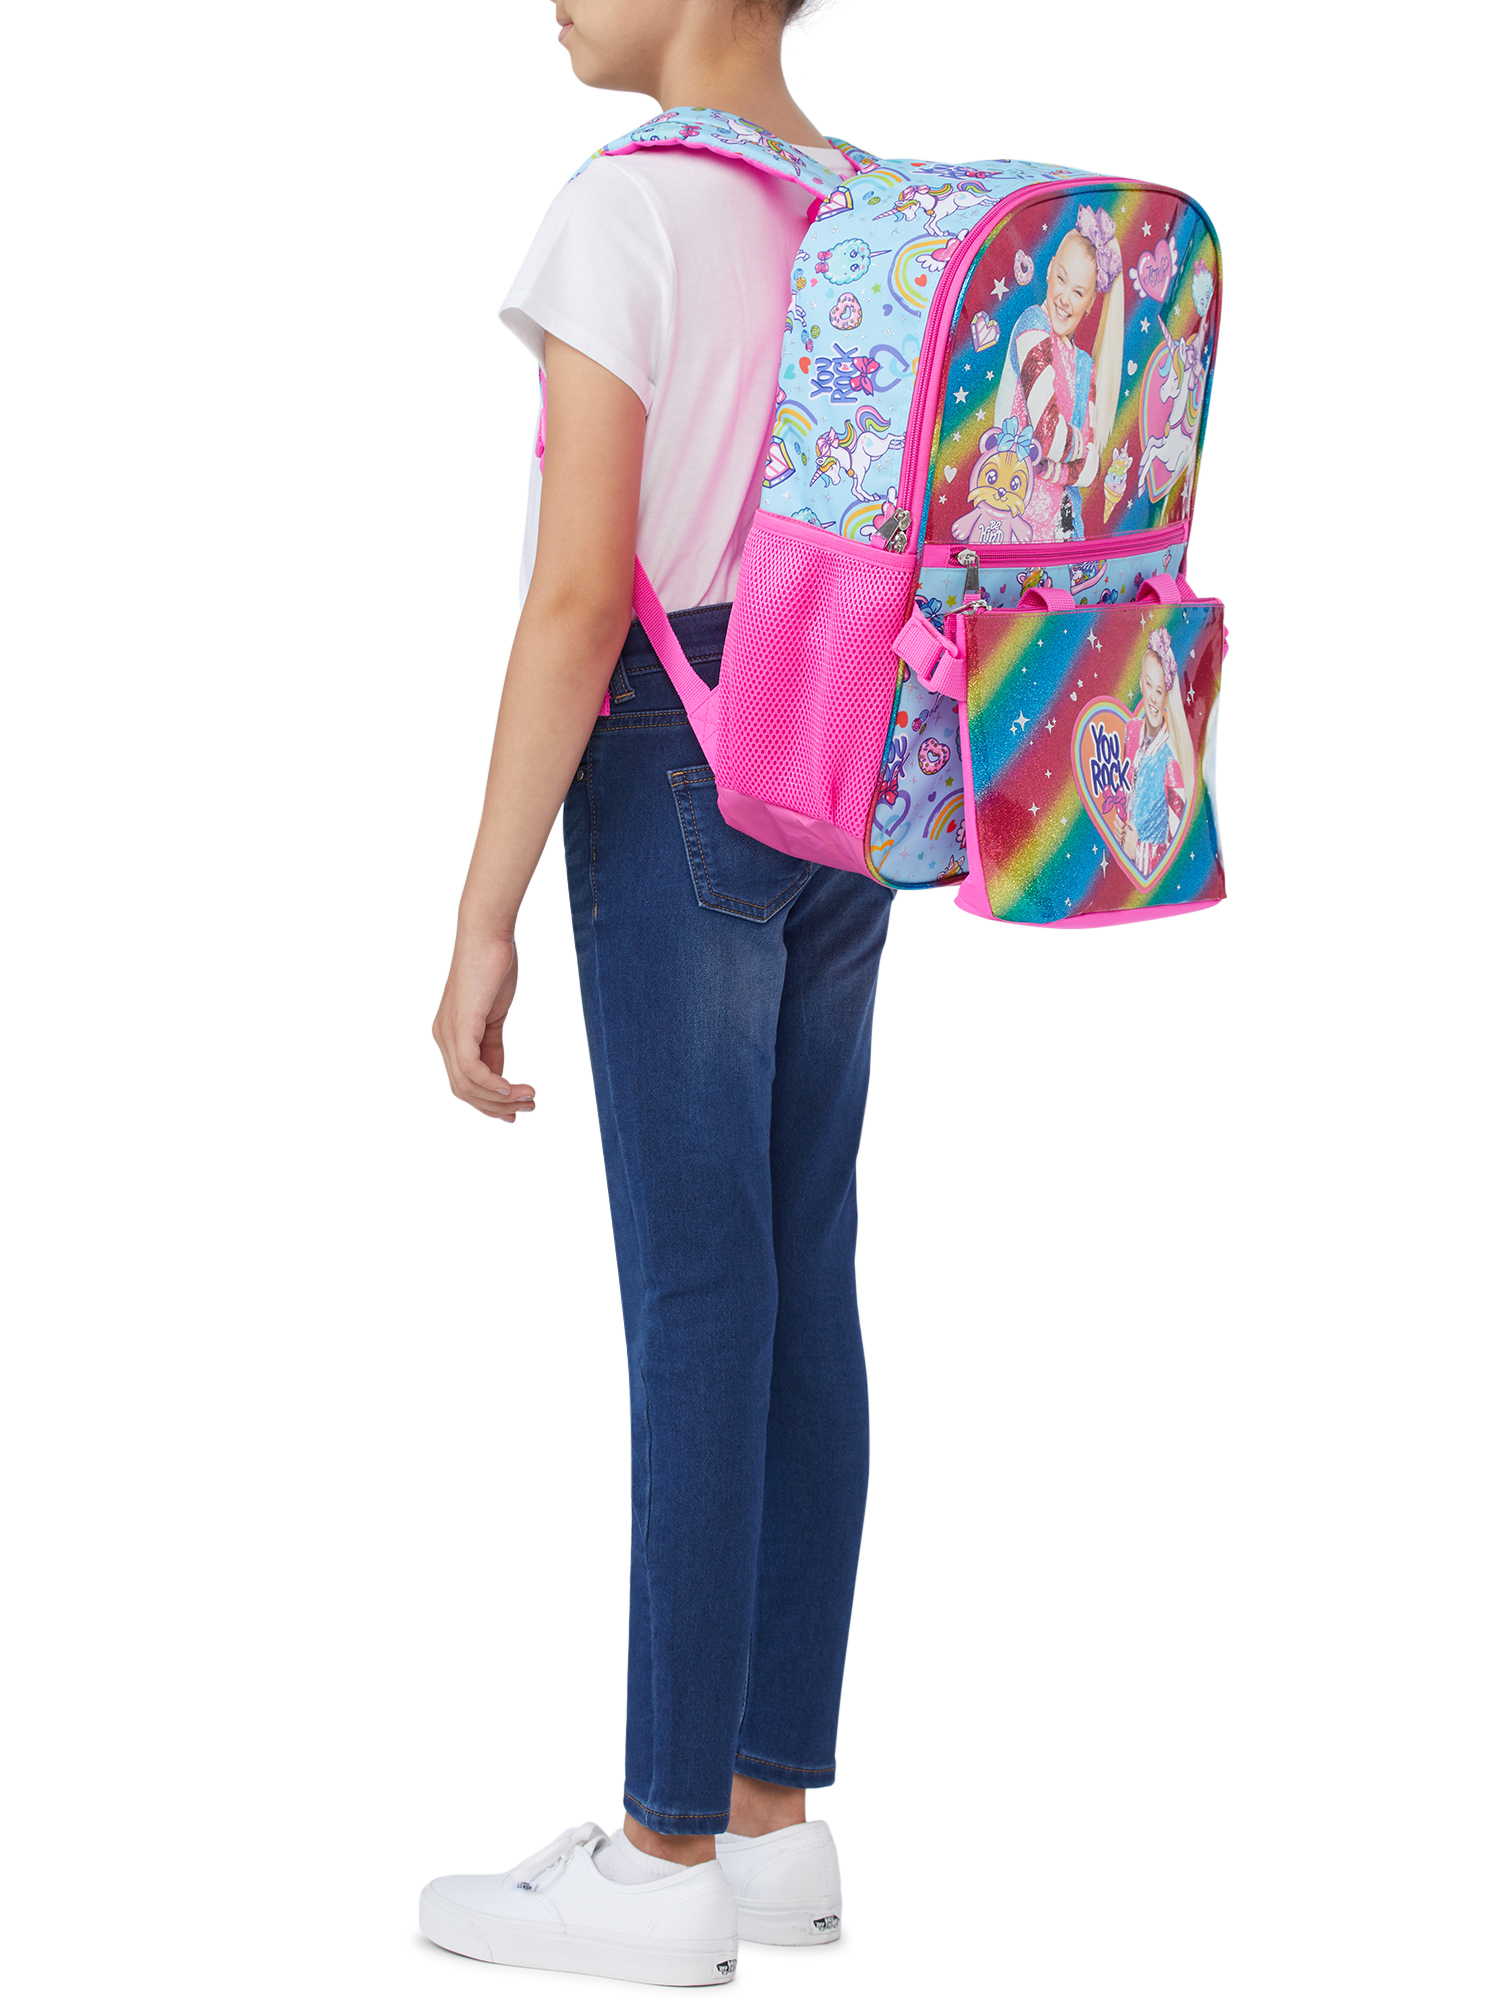 Jojo Siwa Rockin Rainbow Girls 17" Laptop Backpack 2-Piece Set with Lunch Tote Bag, Pink Multi-Color - image 2 of 4